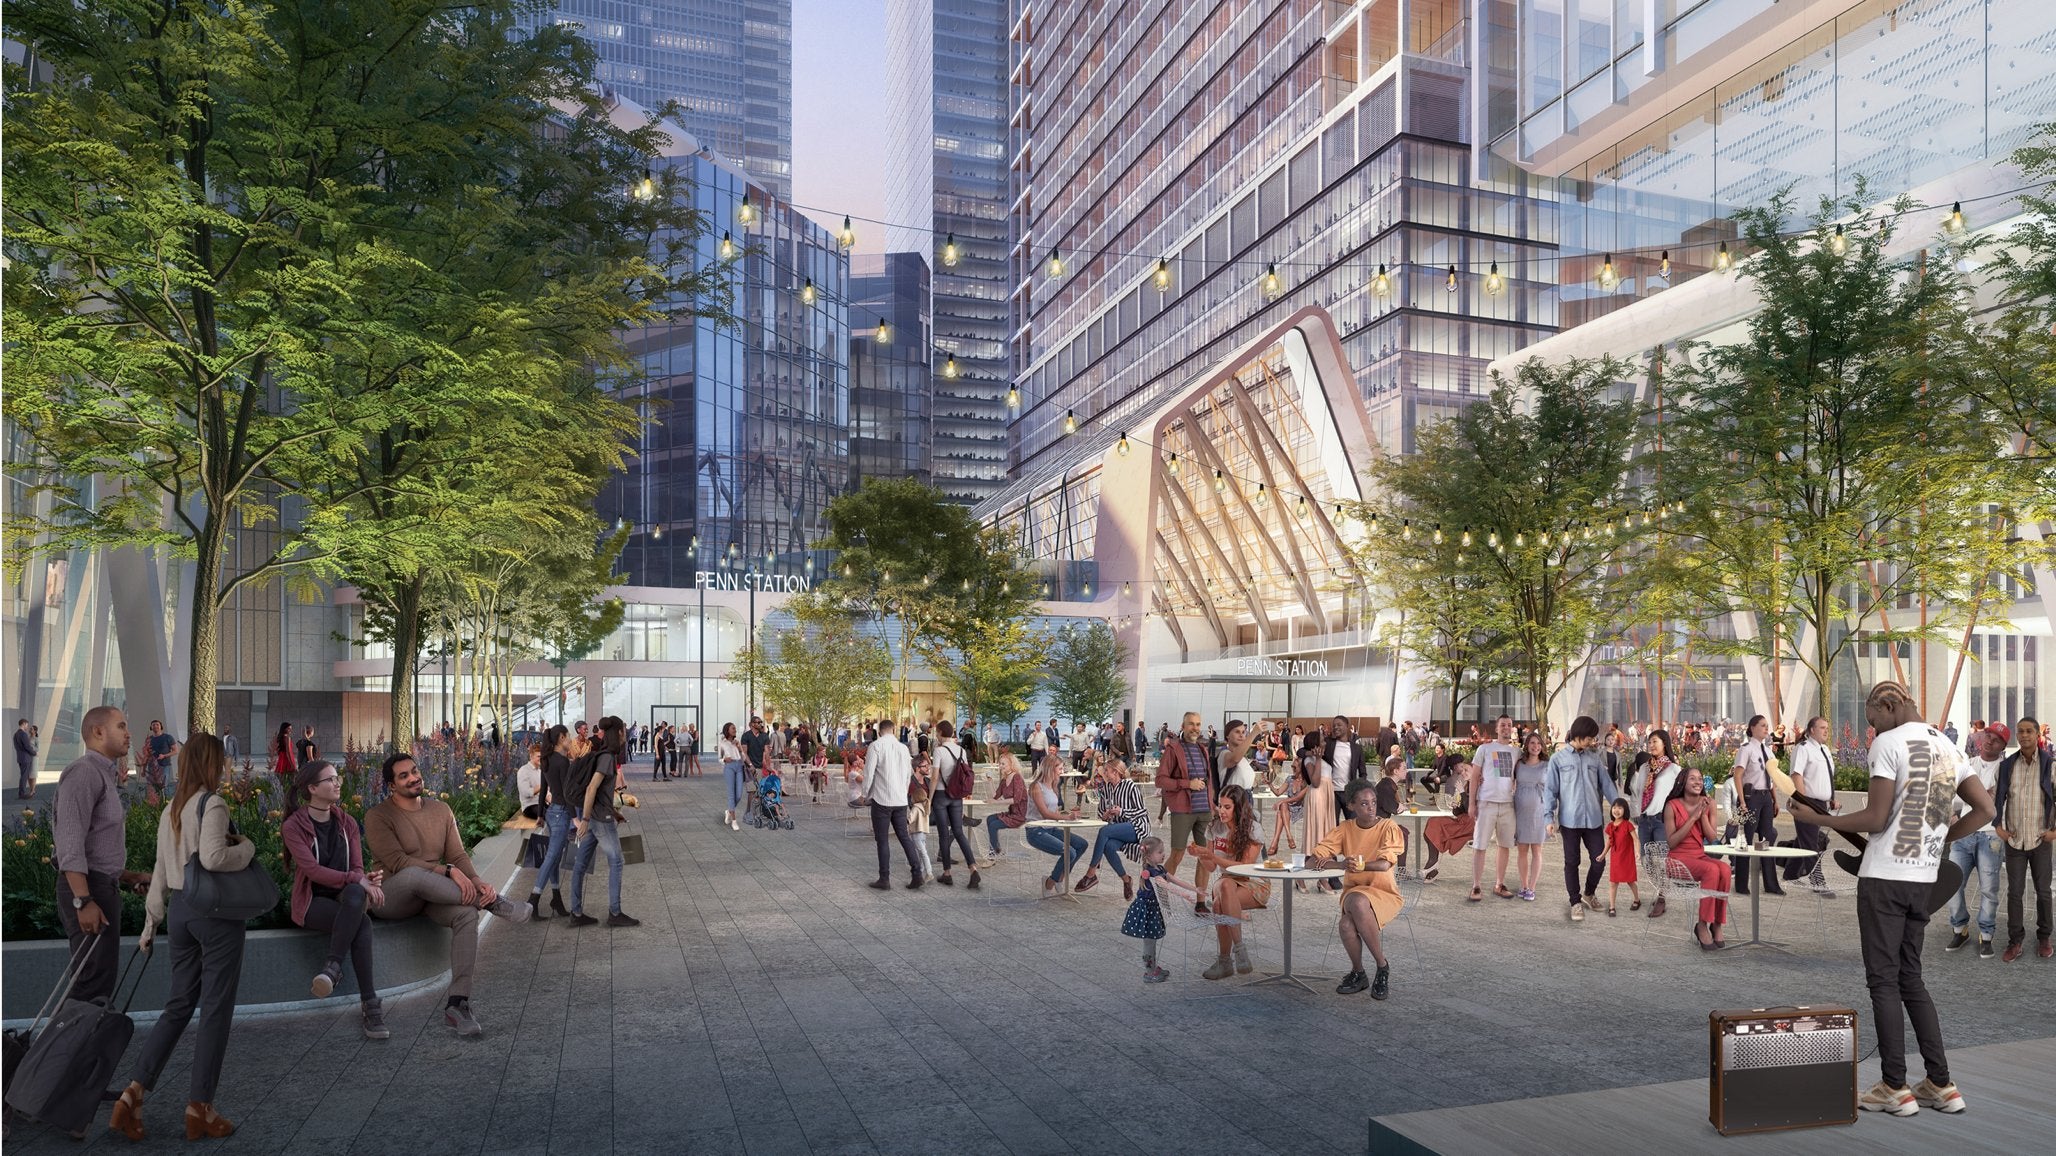 An artist’s rendering shows a public plaza planned for the area in front of the new Penn Station, as proposed by Governor Kathy Hochul